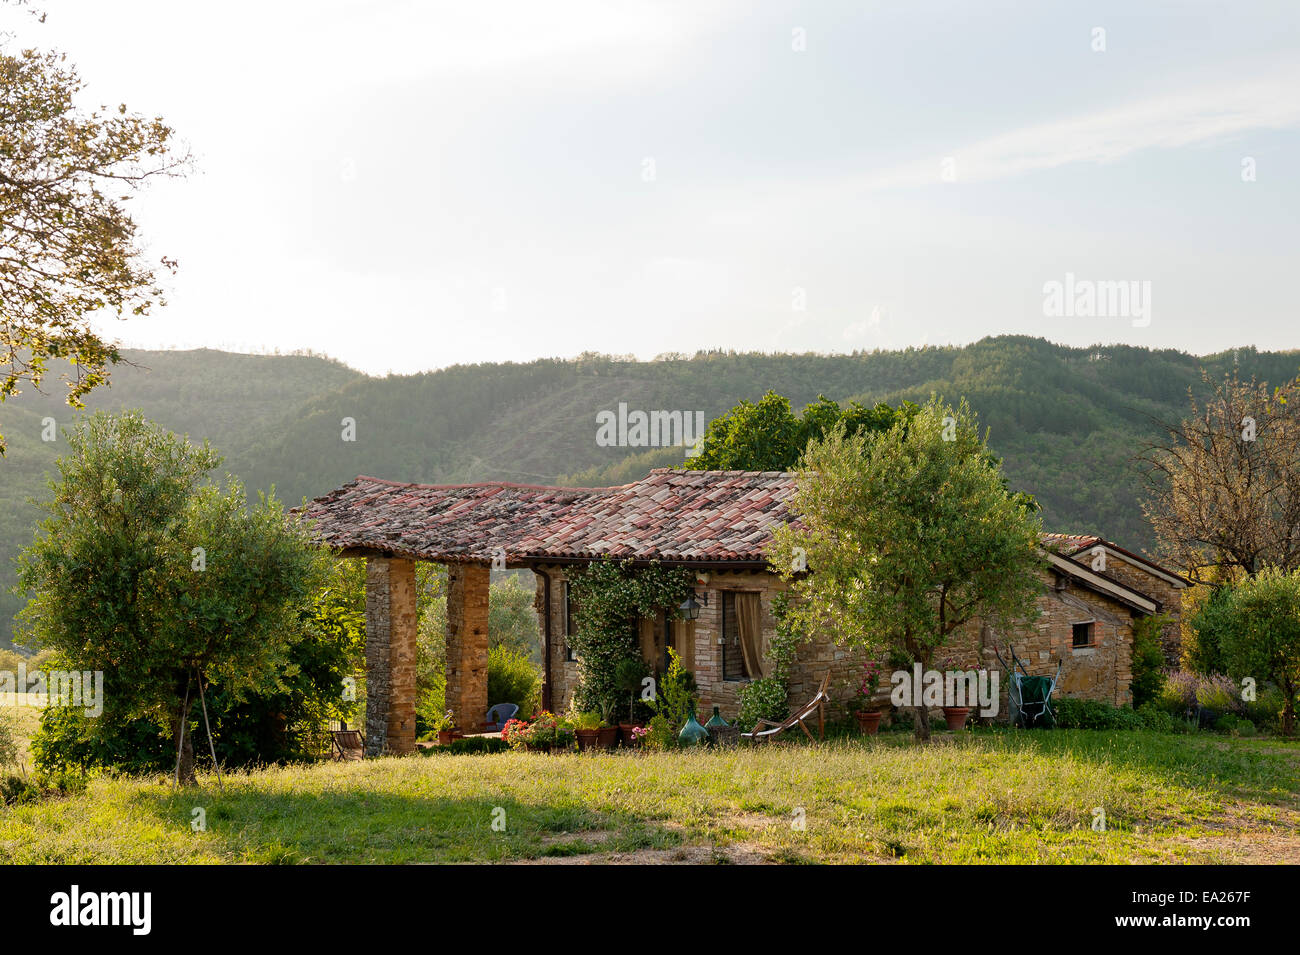 External facade of old farmhouse in hills of Umbrian countryside Stock Photo